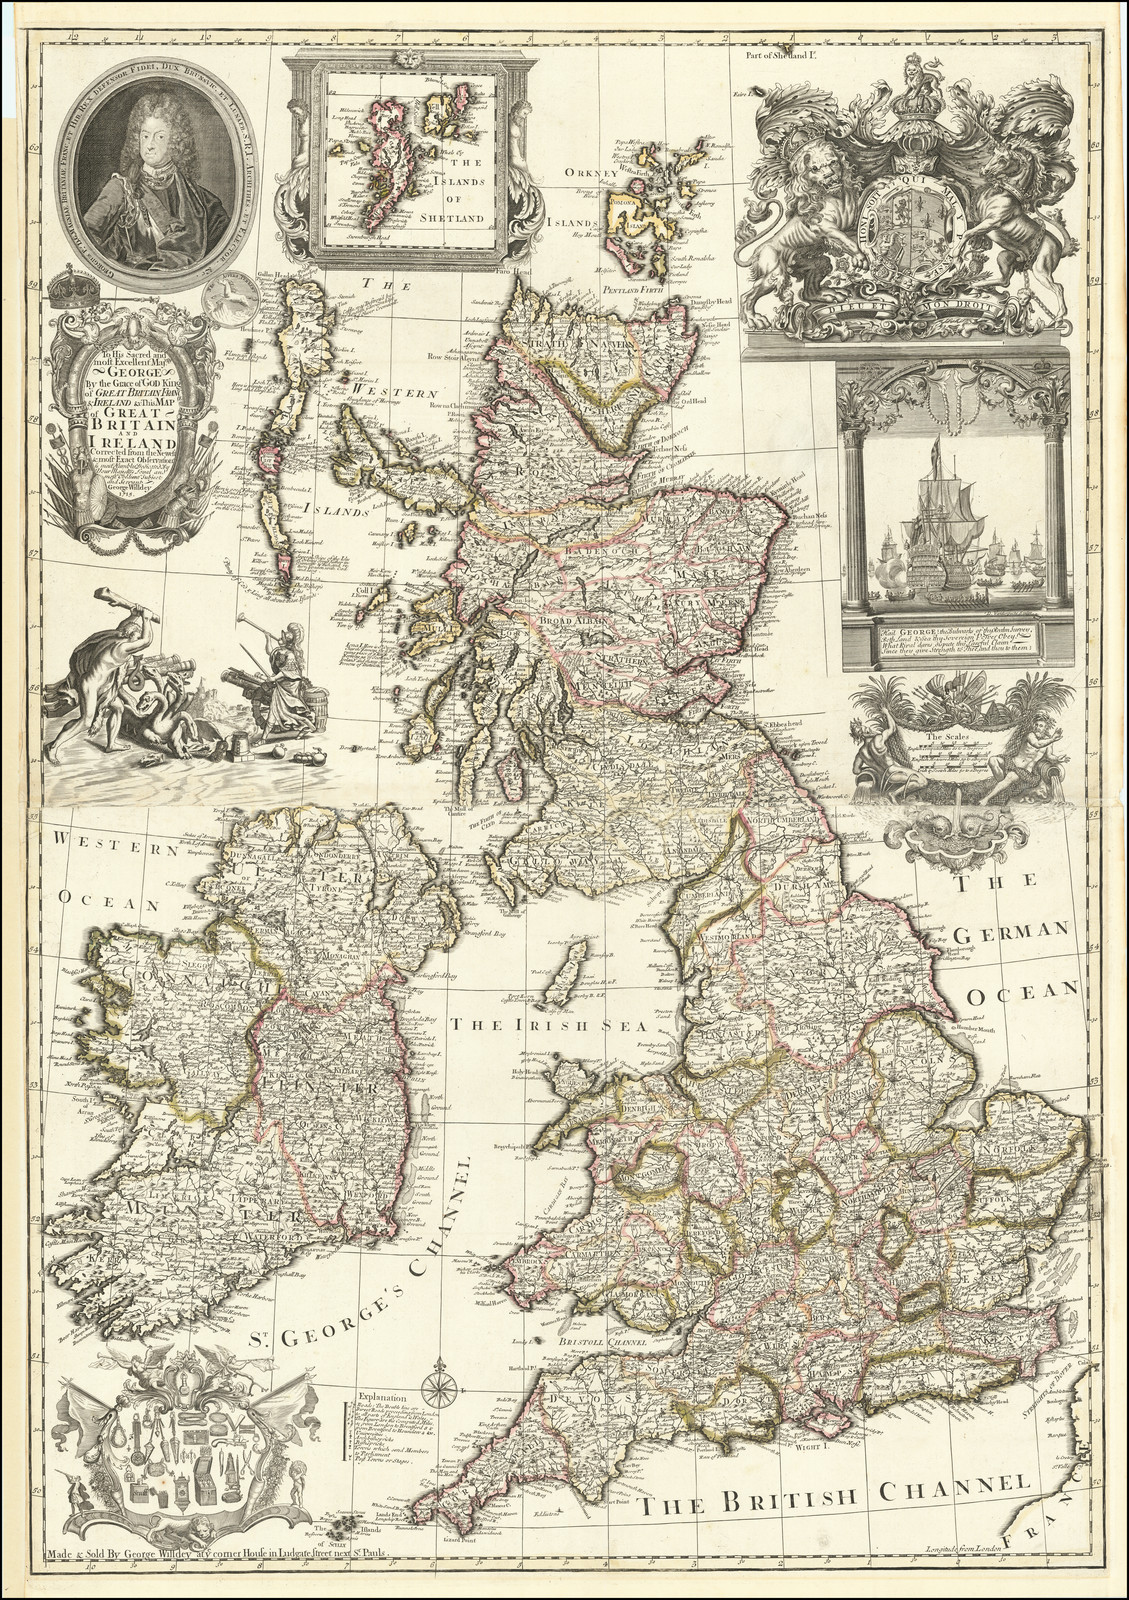 To His Sacred & Most Excellent Majesty George by the Grace of God King of Great Britain France & Ireland &c. This Map of Great Britain and Ireland. . .